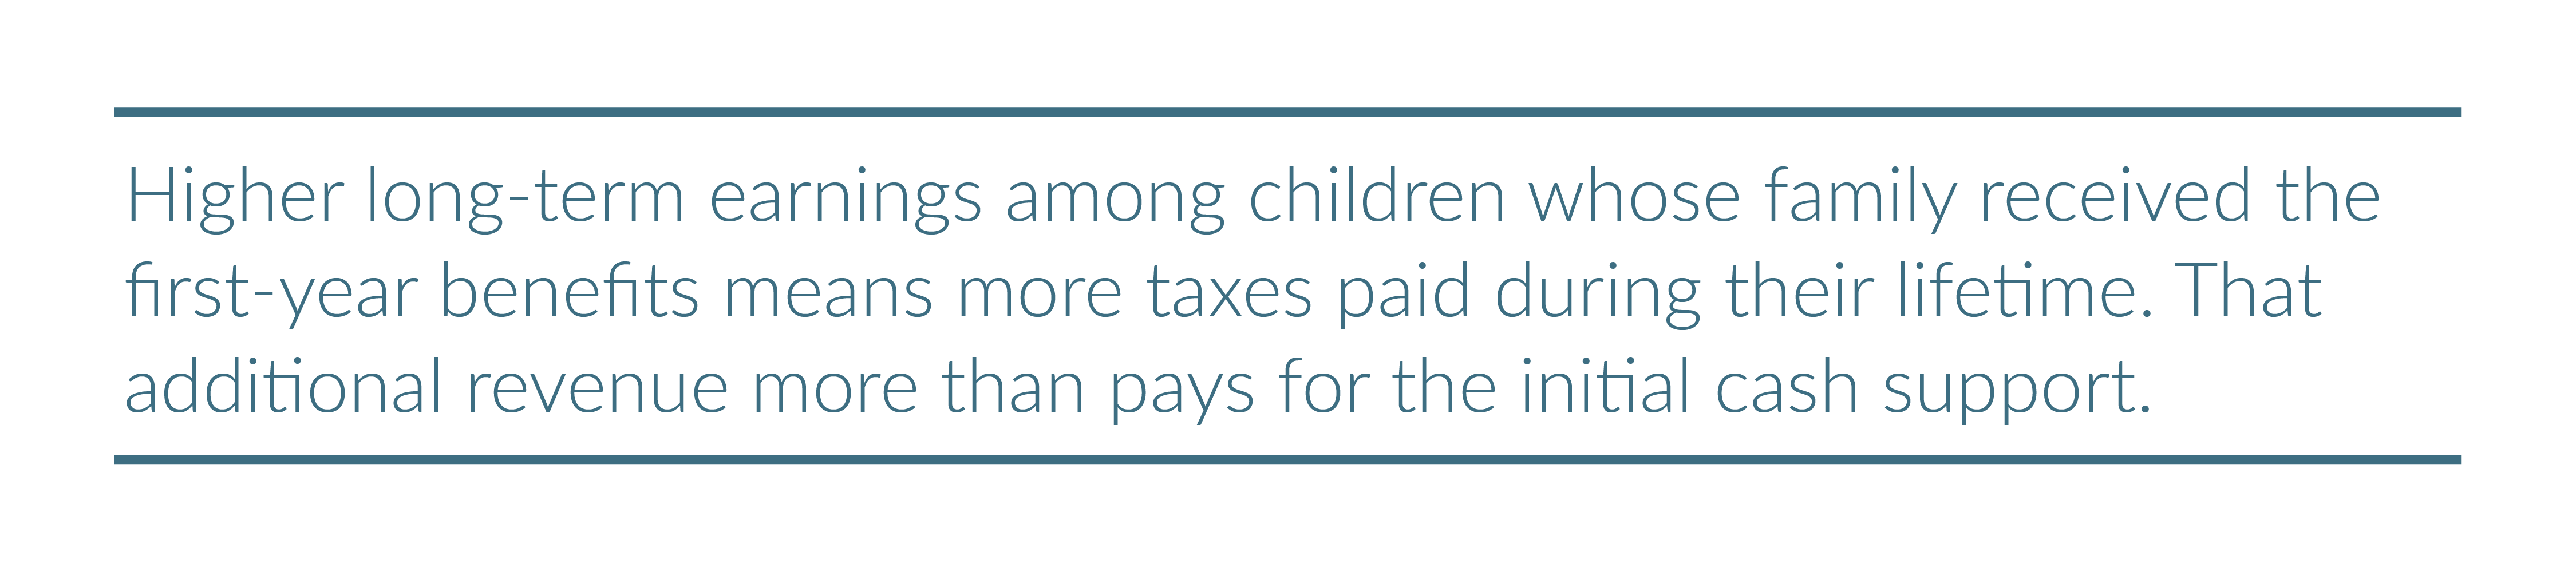 Pull Quote: Higher long-term earnings among children whose family received the first-year benefits means more taxes paid during their lifetime. That additional revenue more than pays for the initial cash support.